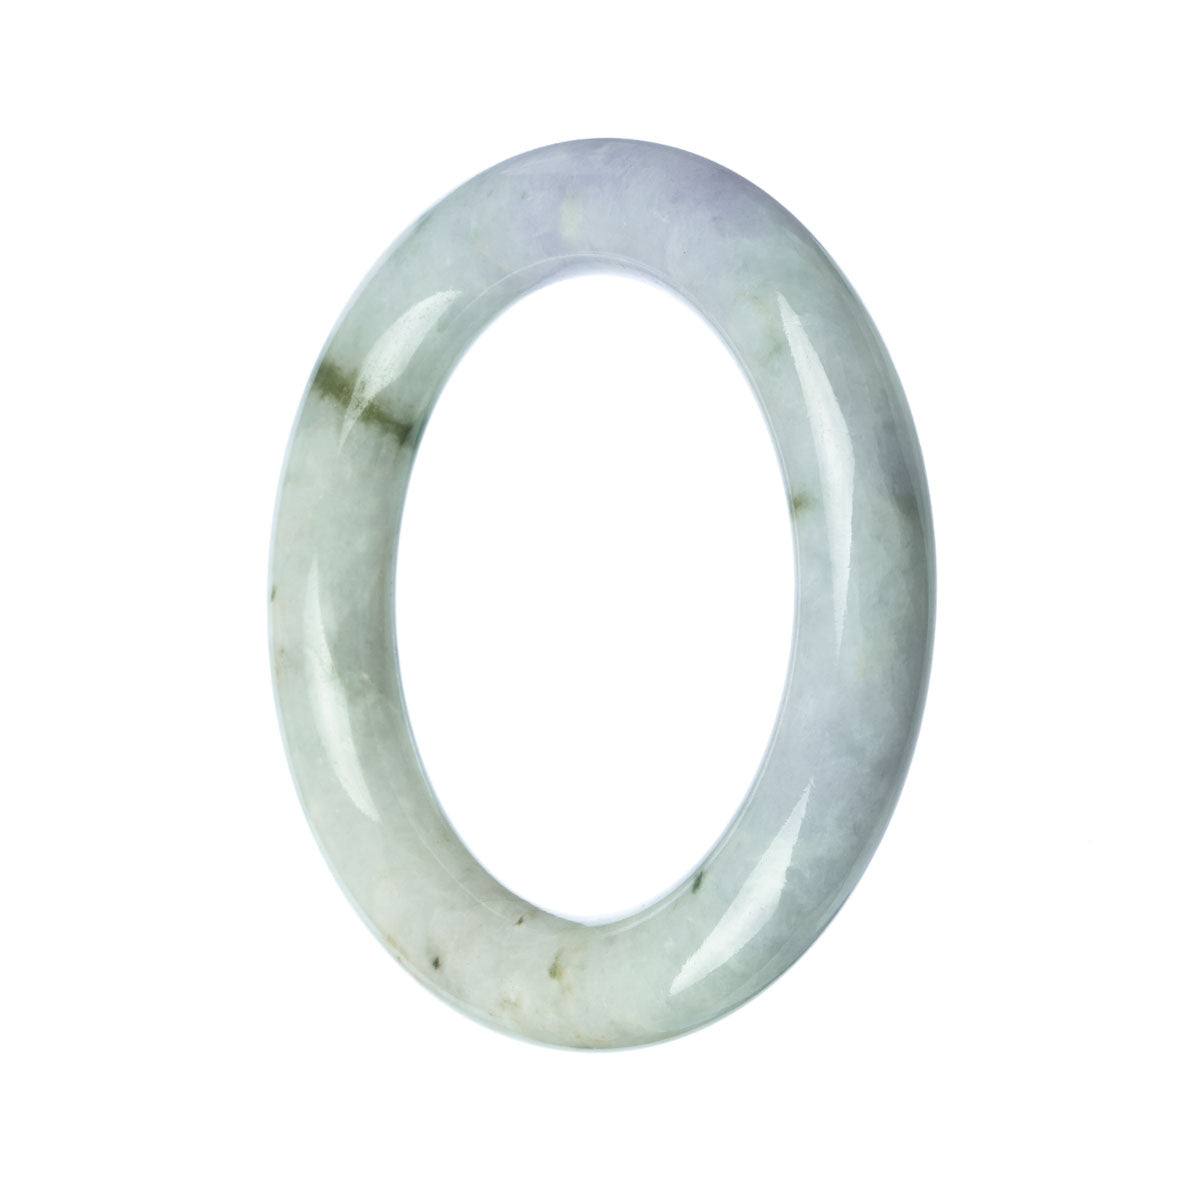 A close-up of a round white jadeite bangle bracelet, with a smooth and polished surface. The bangle has a 57mm diameter and is made from genuine Type A white jadeite, representing high quality and authenticity. The bracelet is being sold by the brand MAYS.